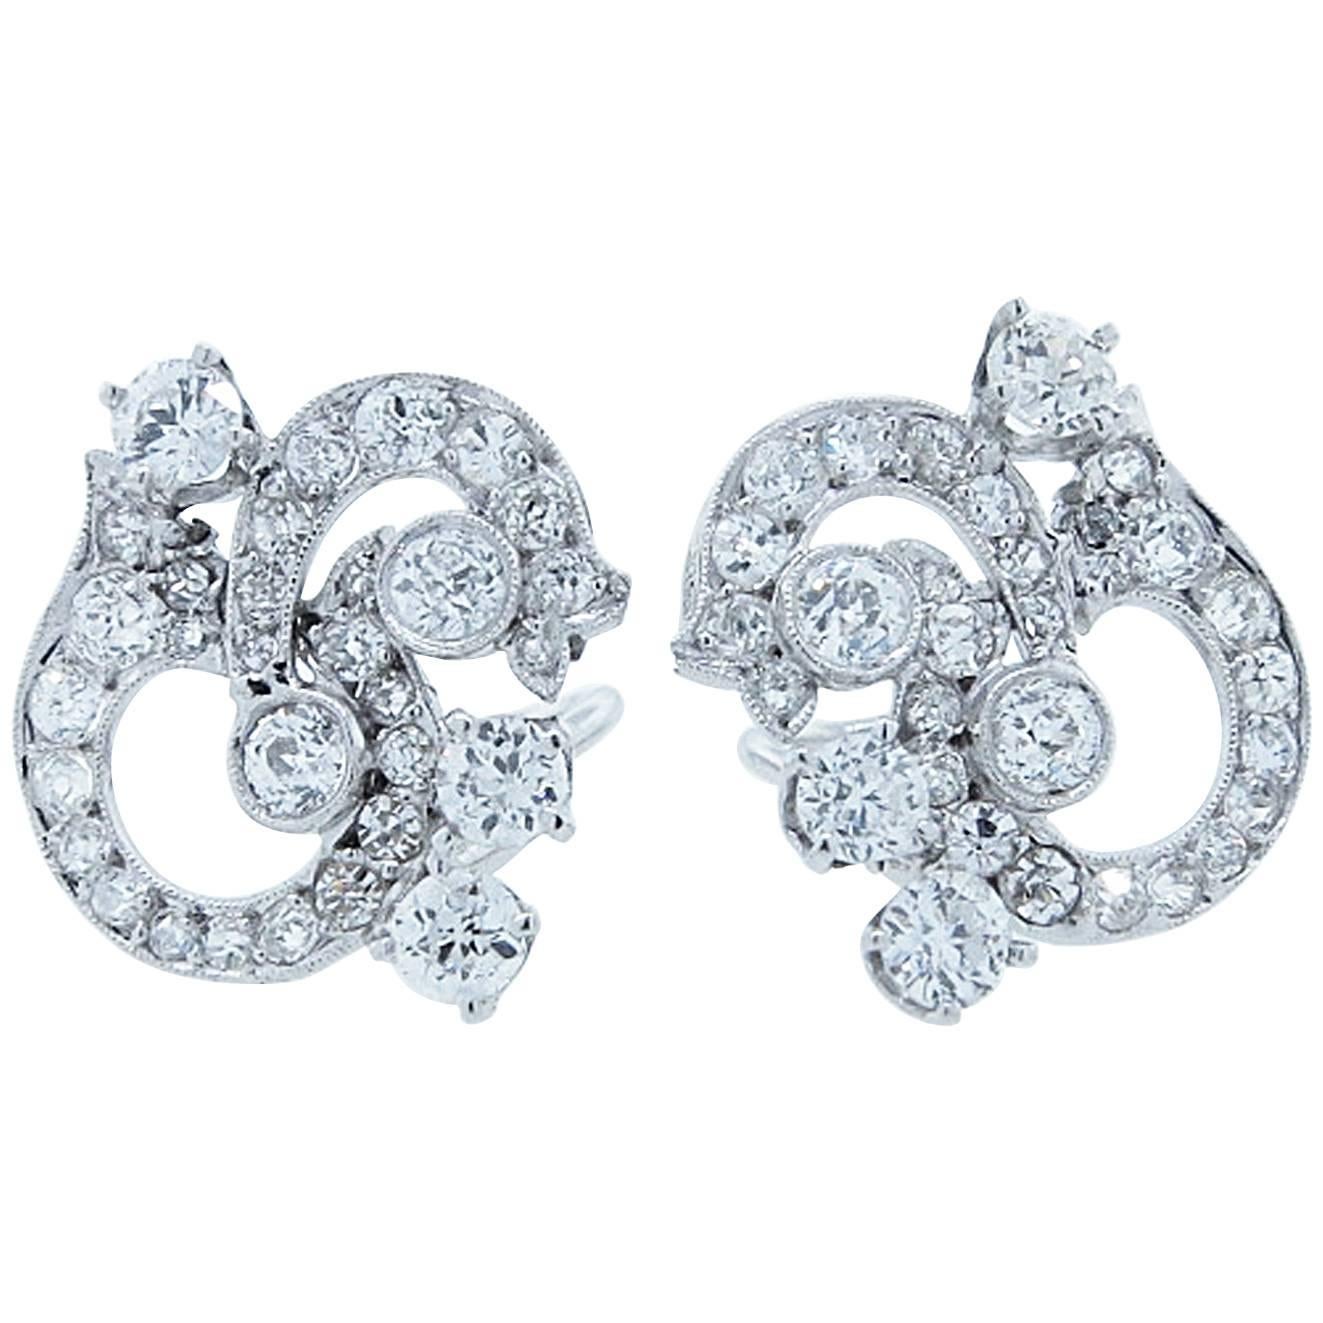 Pretty and Wearable Diamond Platinum Earrings